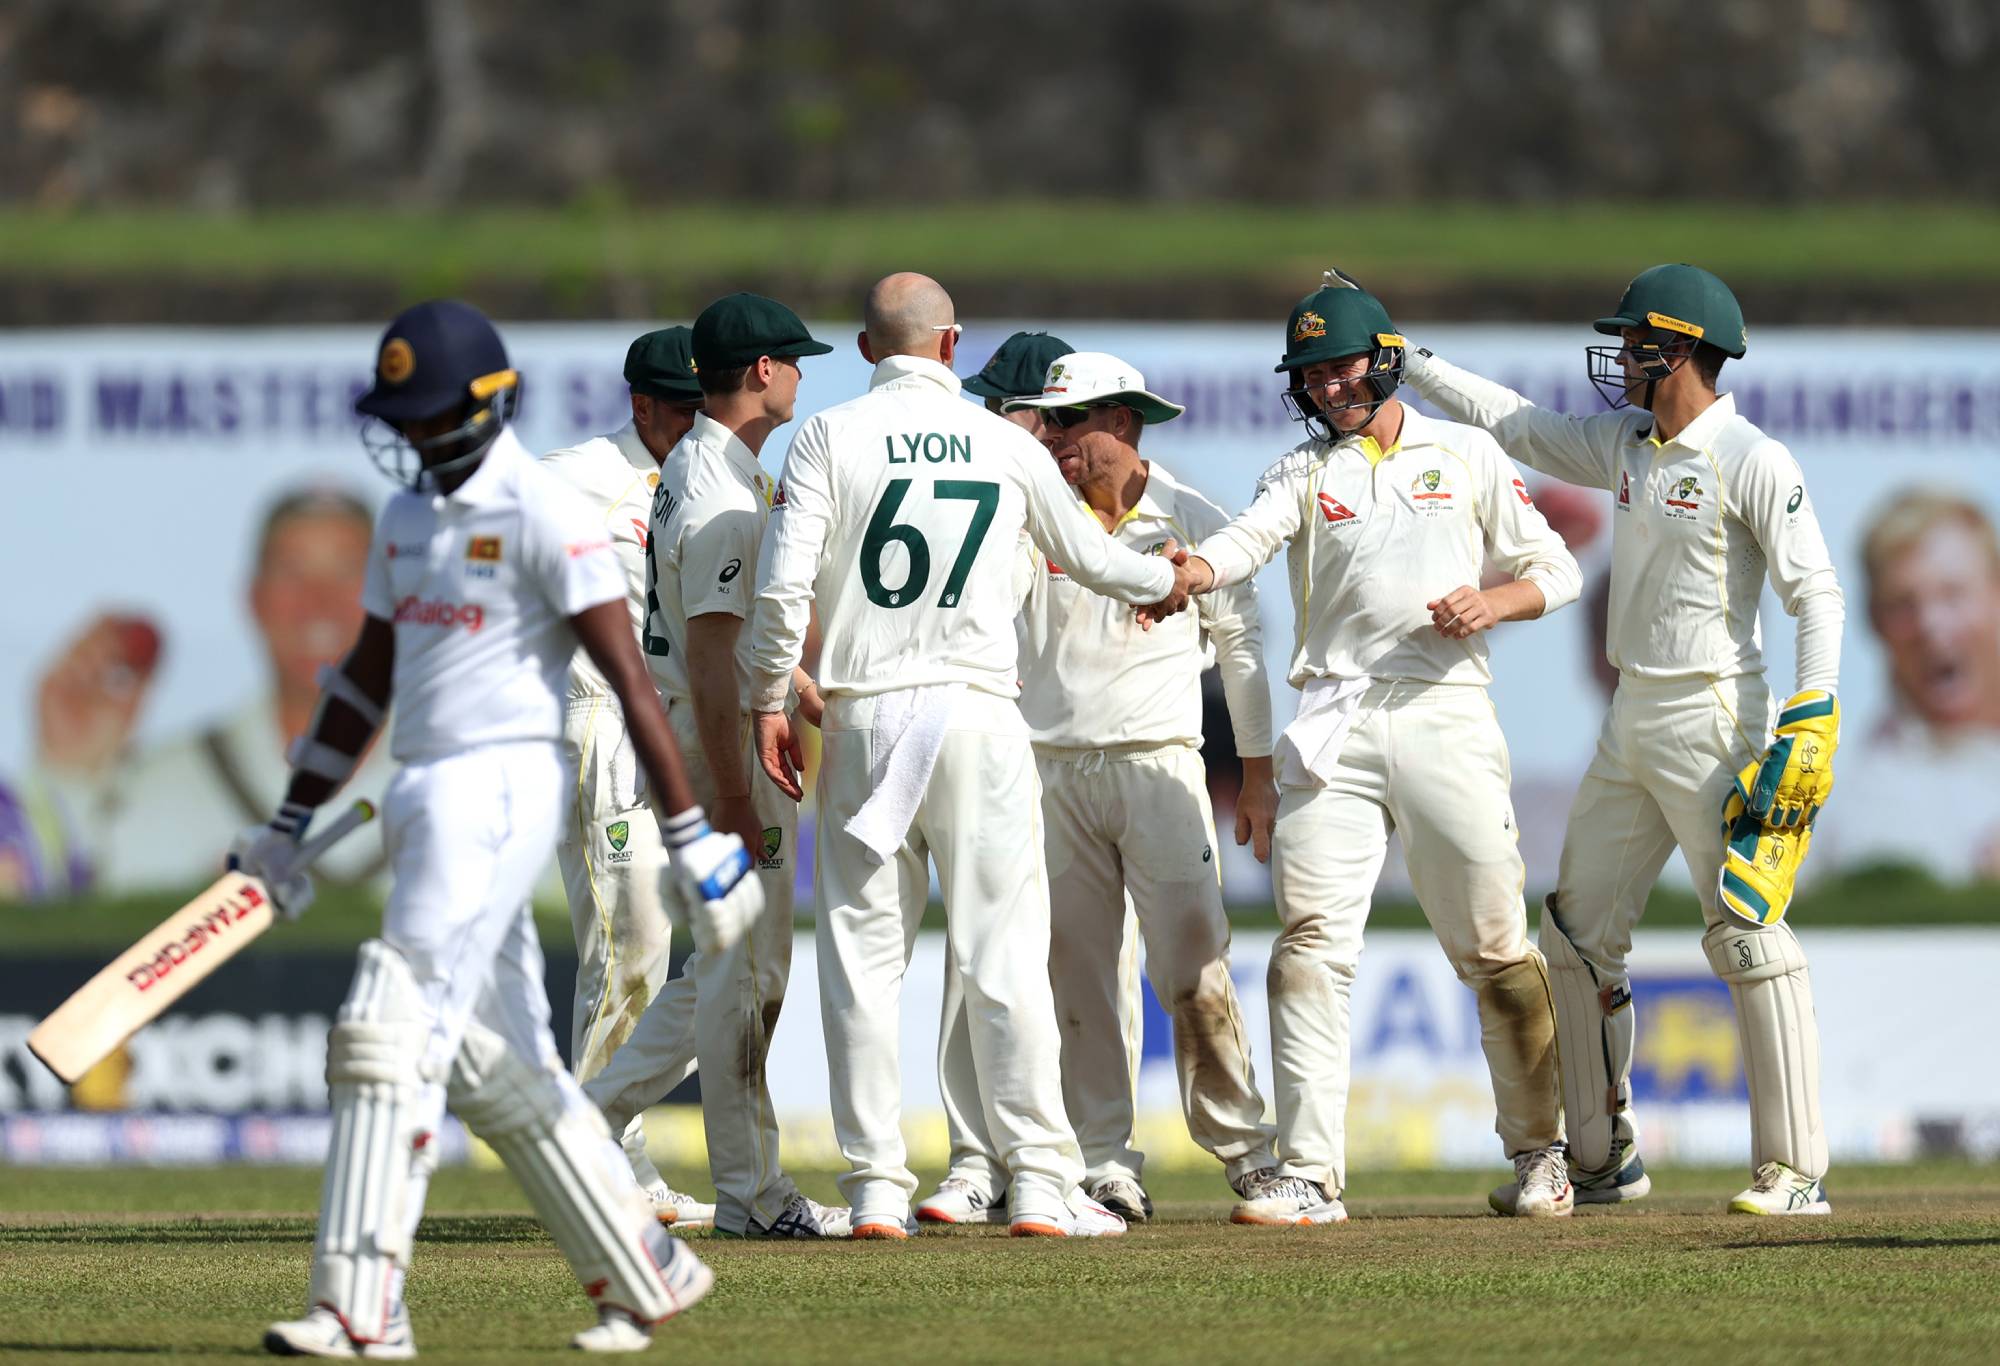 GALLE, SRI LANKA - JUNE 29: Australian players celebrate after dismissing Lasith Embuldeniya of Sri Lanka during day one of the First Test in the series between Sri Lanka and Australia at Galle International Stadium on June 29, 2022 in Galle, Sri Lanka. (Photo by Buddhika Weerasinghe/Getty Images)